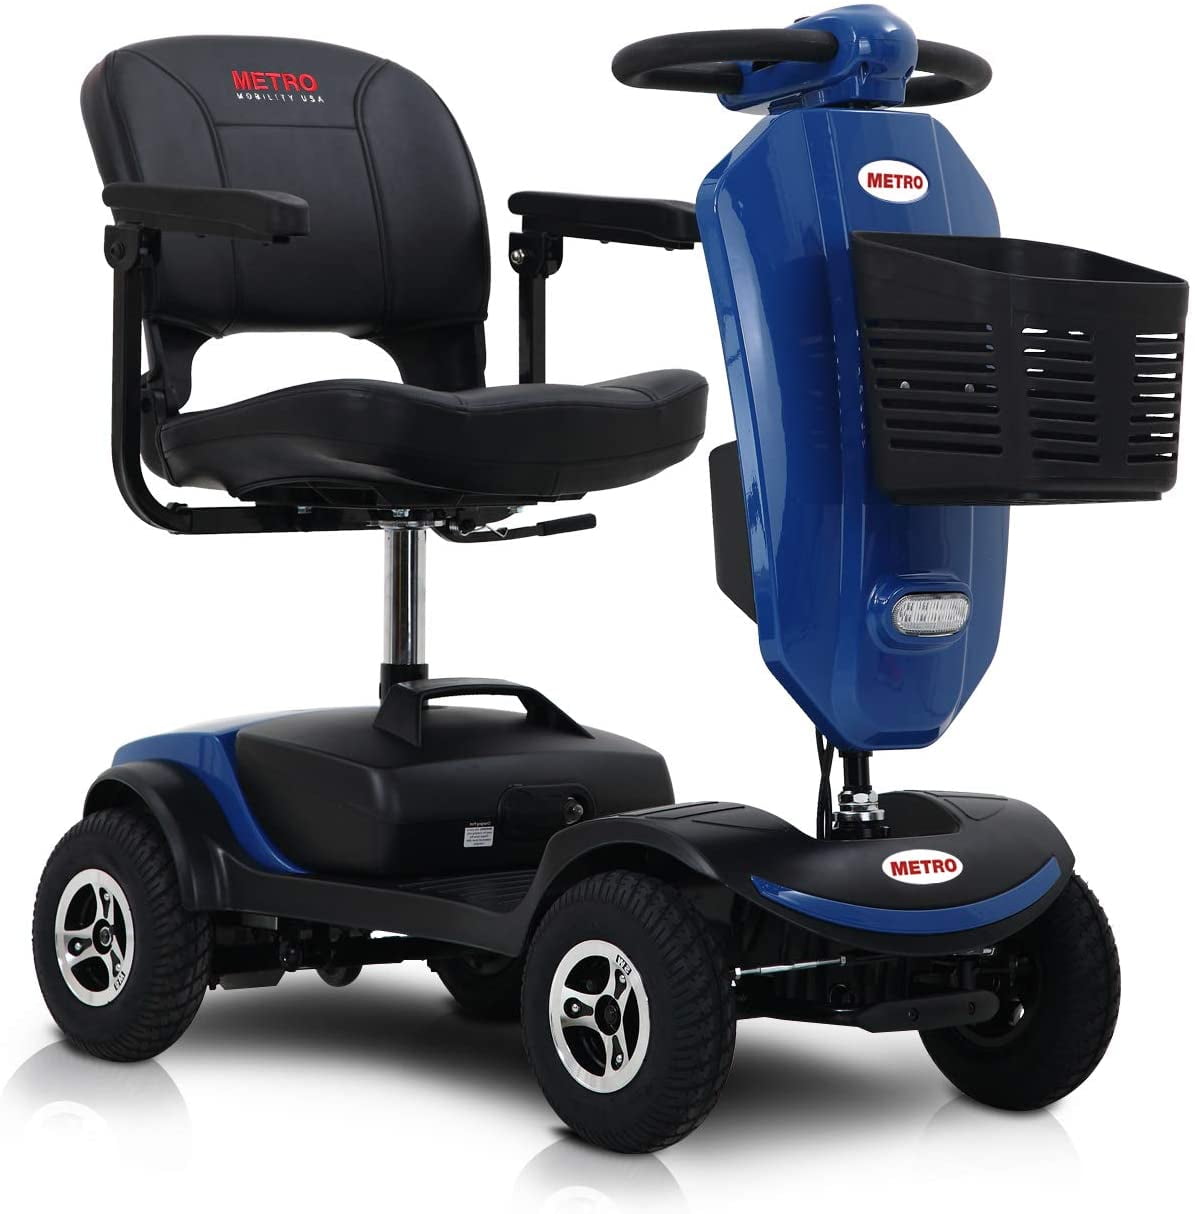 Mobility Scooters for Seniors, Heavy Duty 300W Motor 4 Wheel Electric Scooter with Windshield, Headlights & Rear LED Light, Holder, USB Charging Port, Gift Flag, 300lbs, Blue, SS113 - Walmart.com